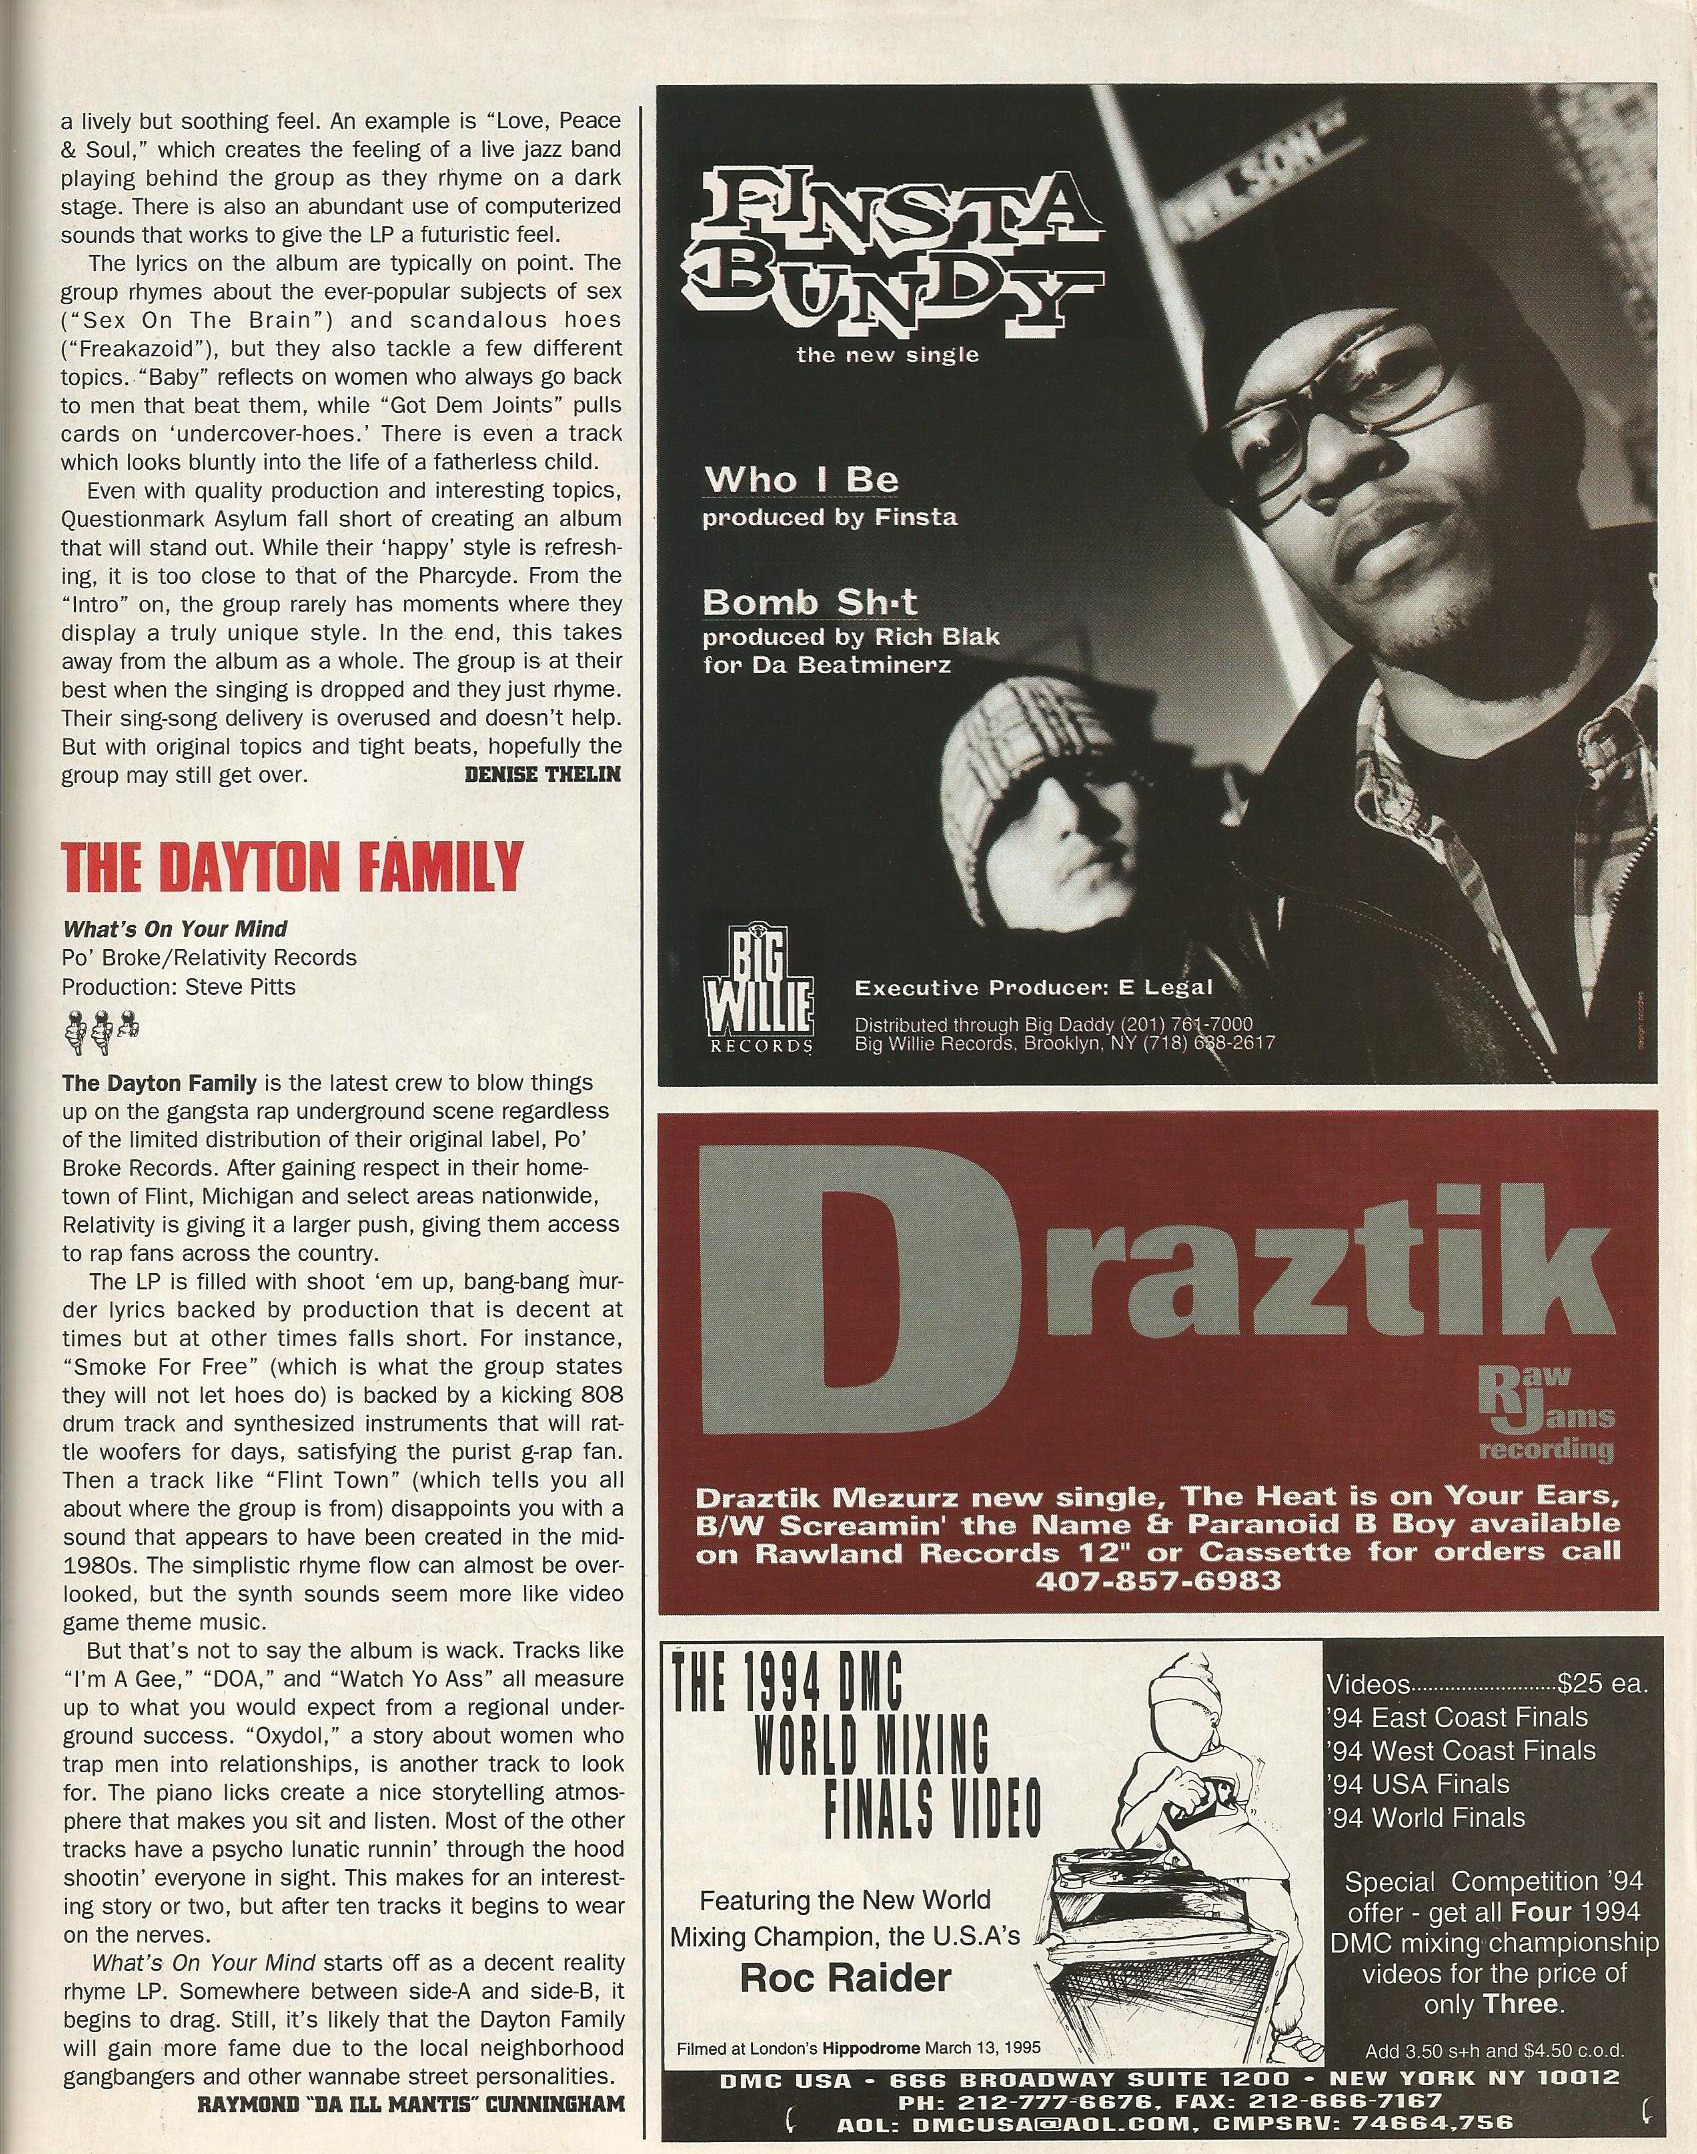 HipHop-TheGoldenEra: Record Report - The Source July 1995